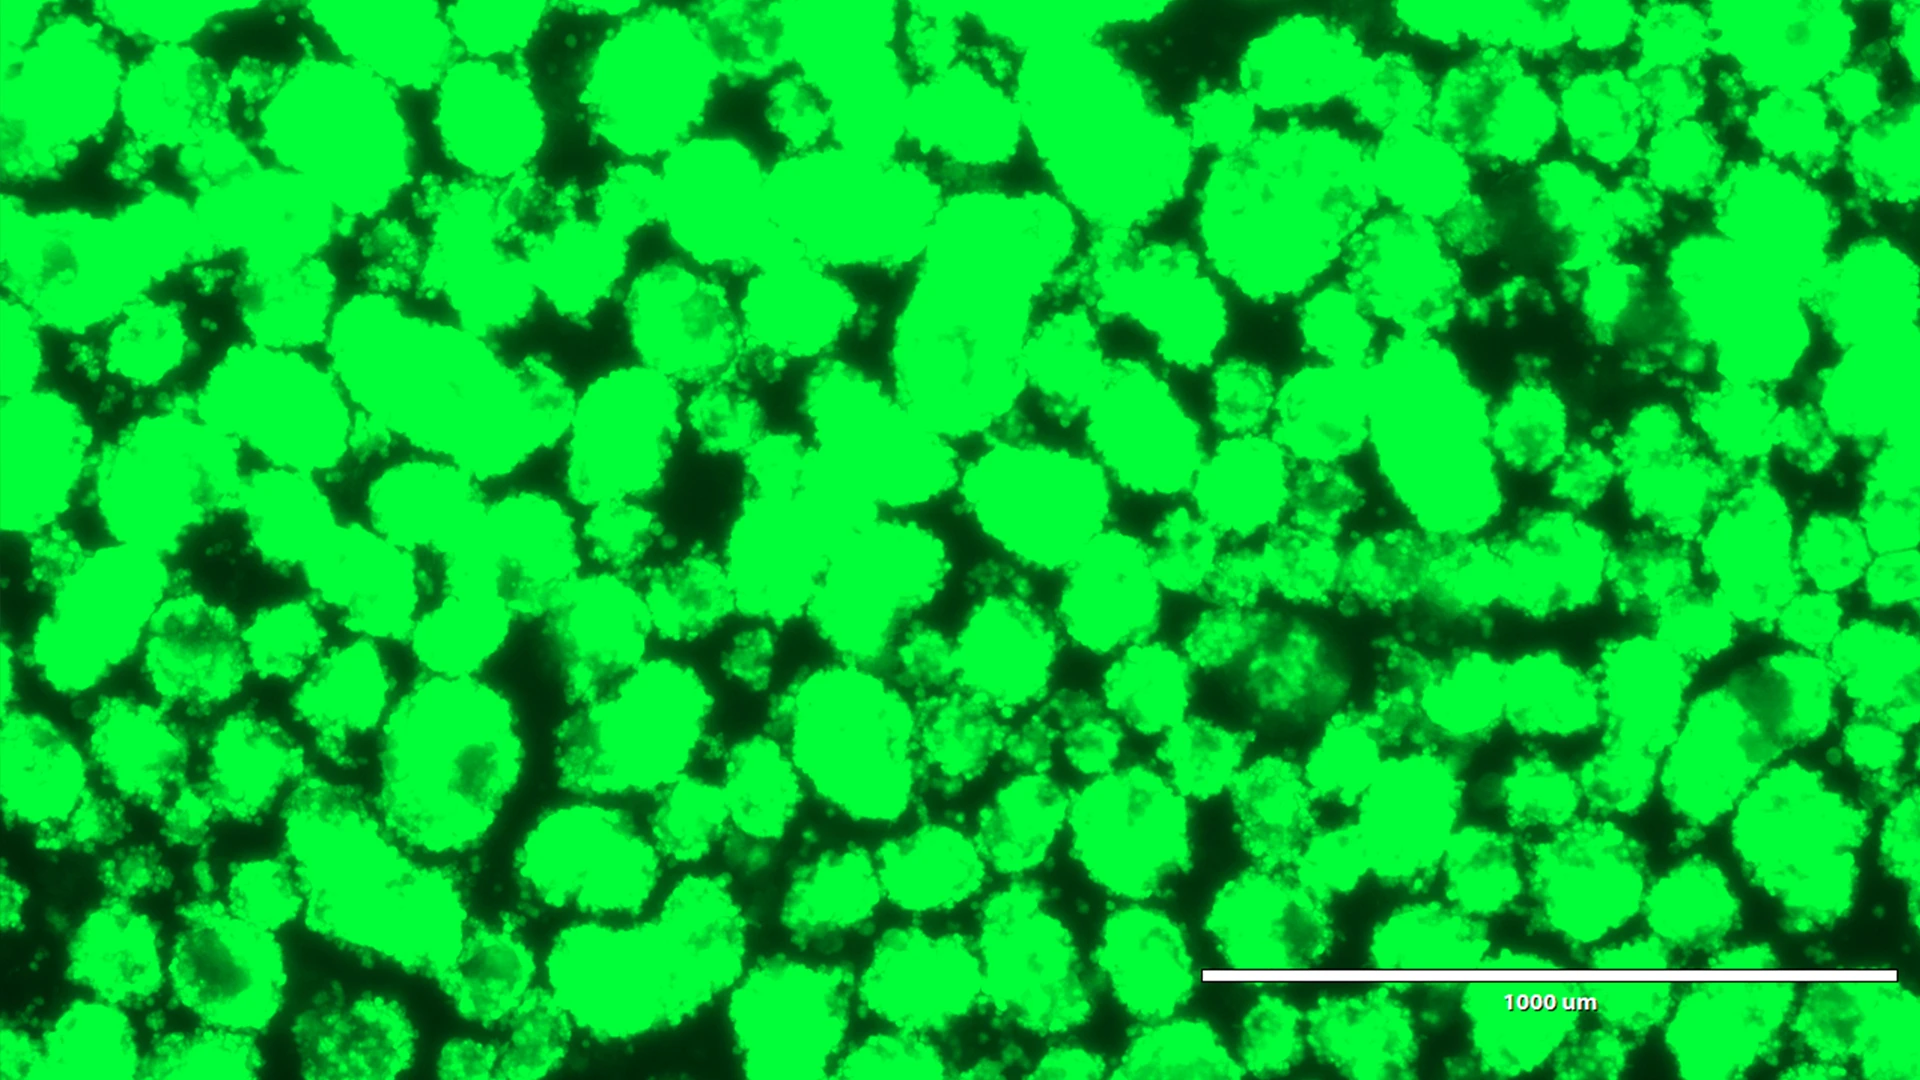 Human pseudoislets five days after lentiviral transduction with a shRNA and a reporter gene under bright light, and blue light.